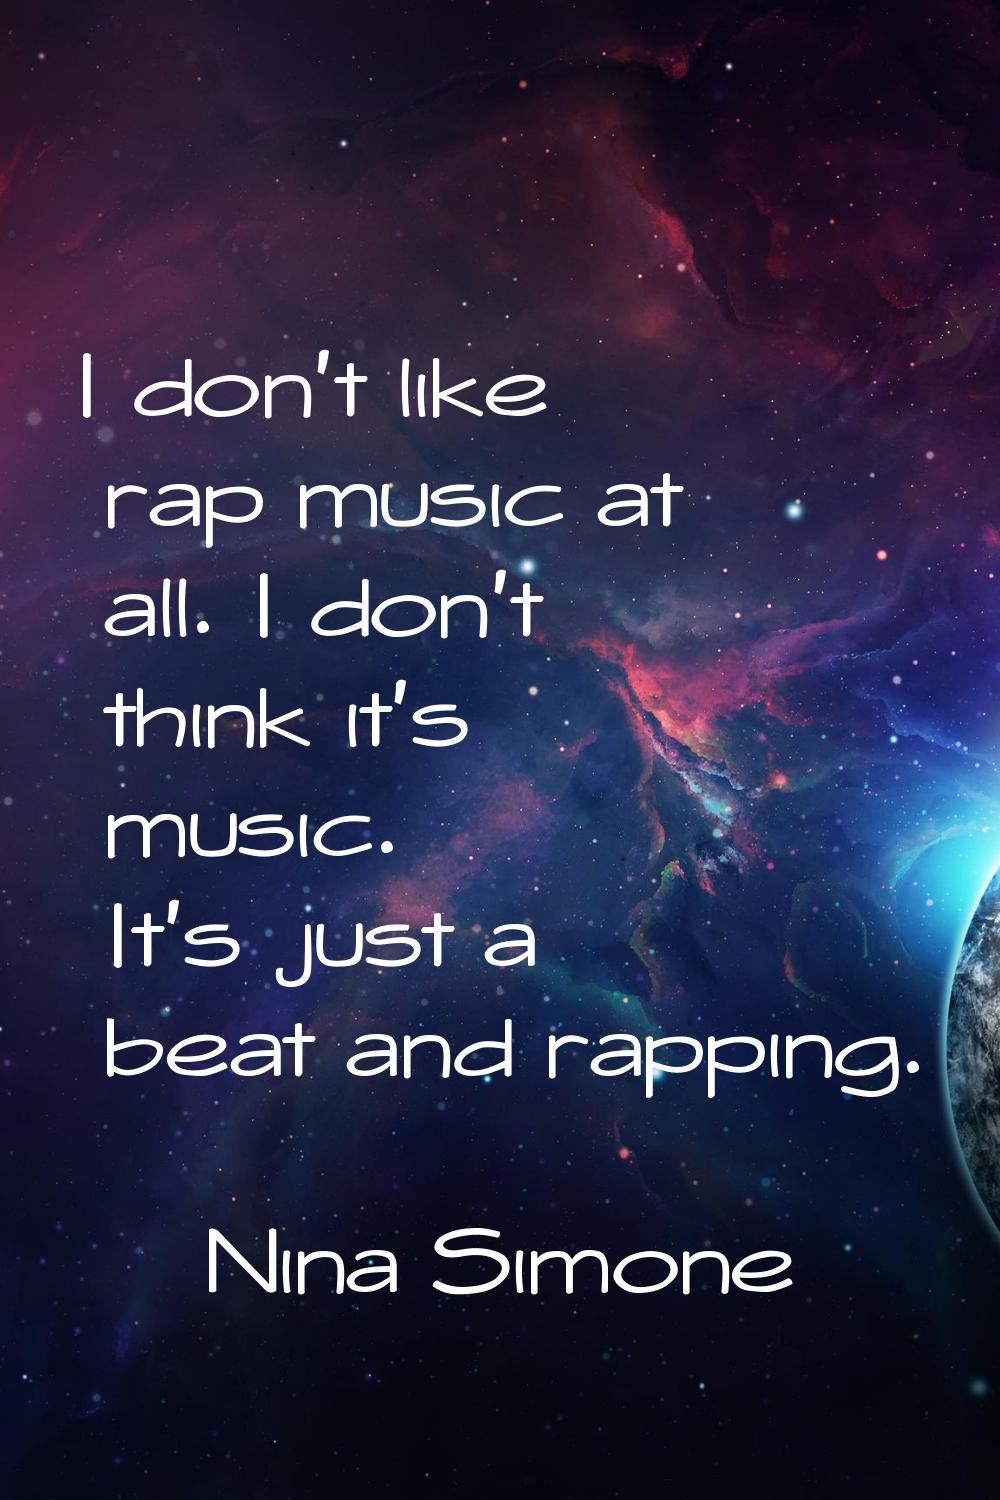 I don't like rap music at all. I don't think it's music. It's just a beat and rapping.